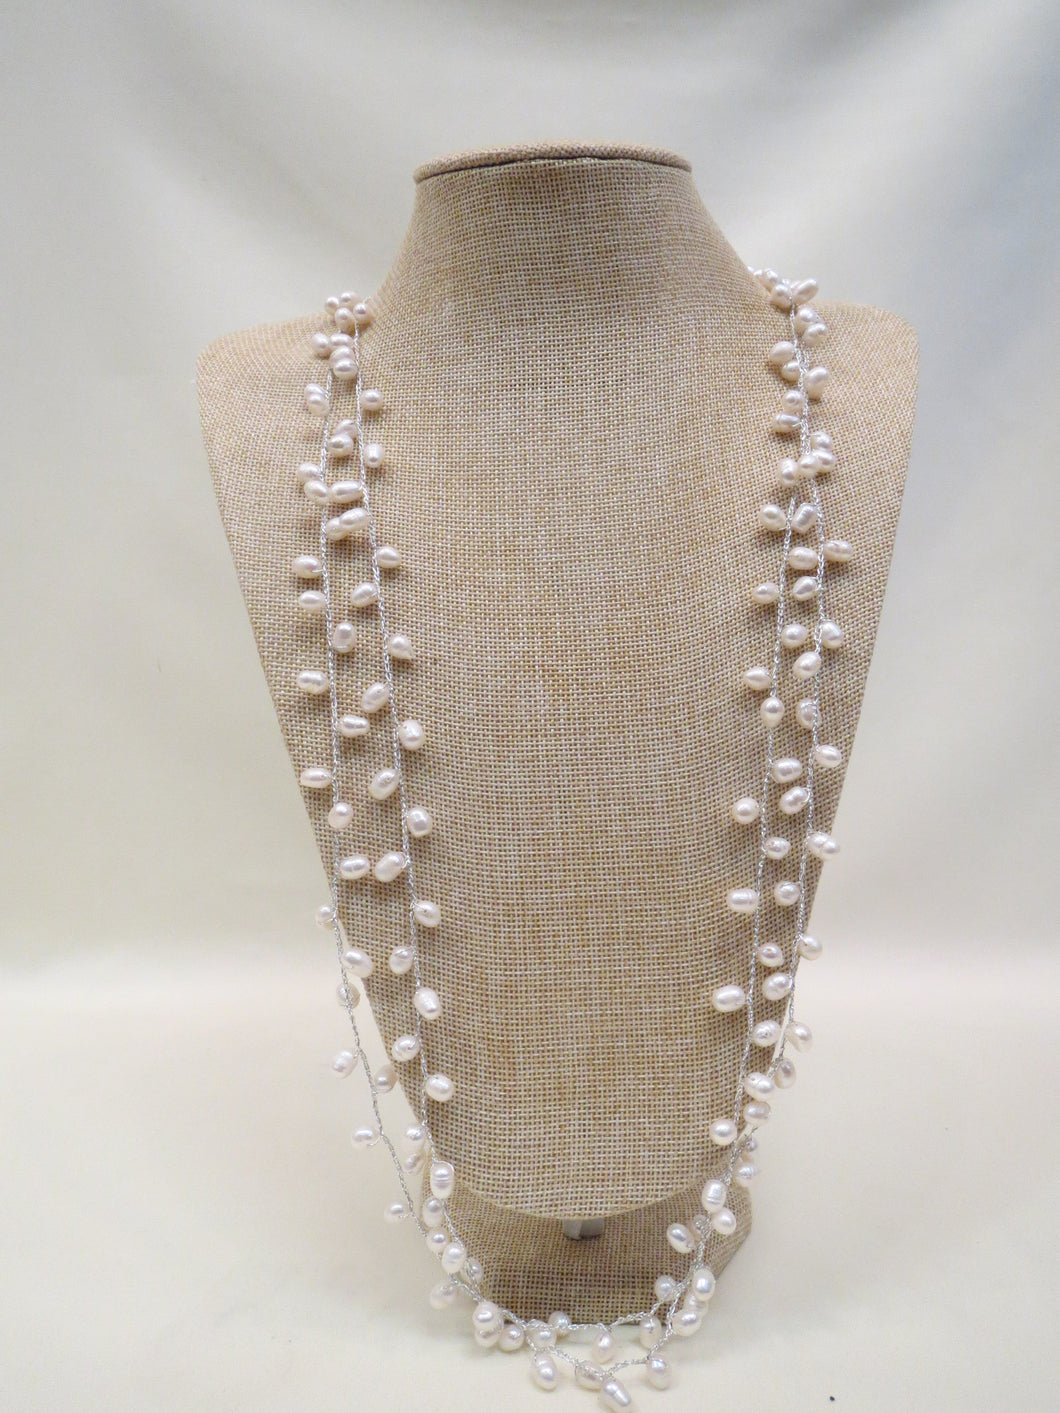 ADO Silver Thread Necklace w/ Pearls | All Dec'd Out